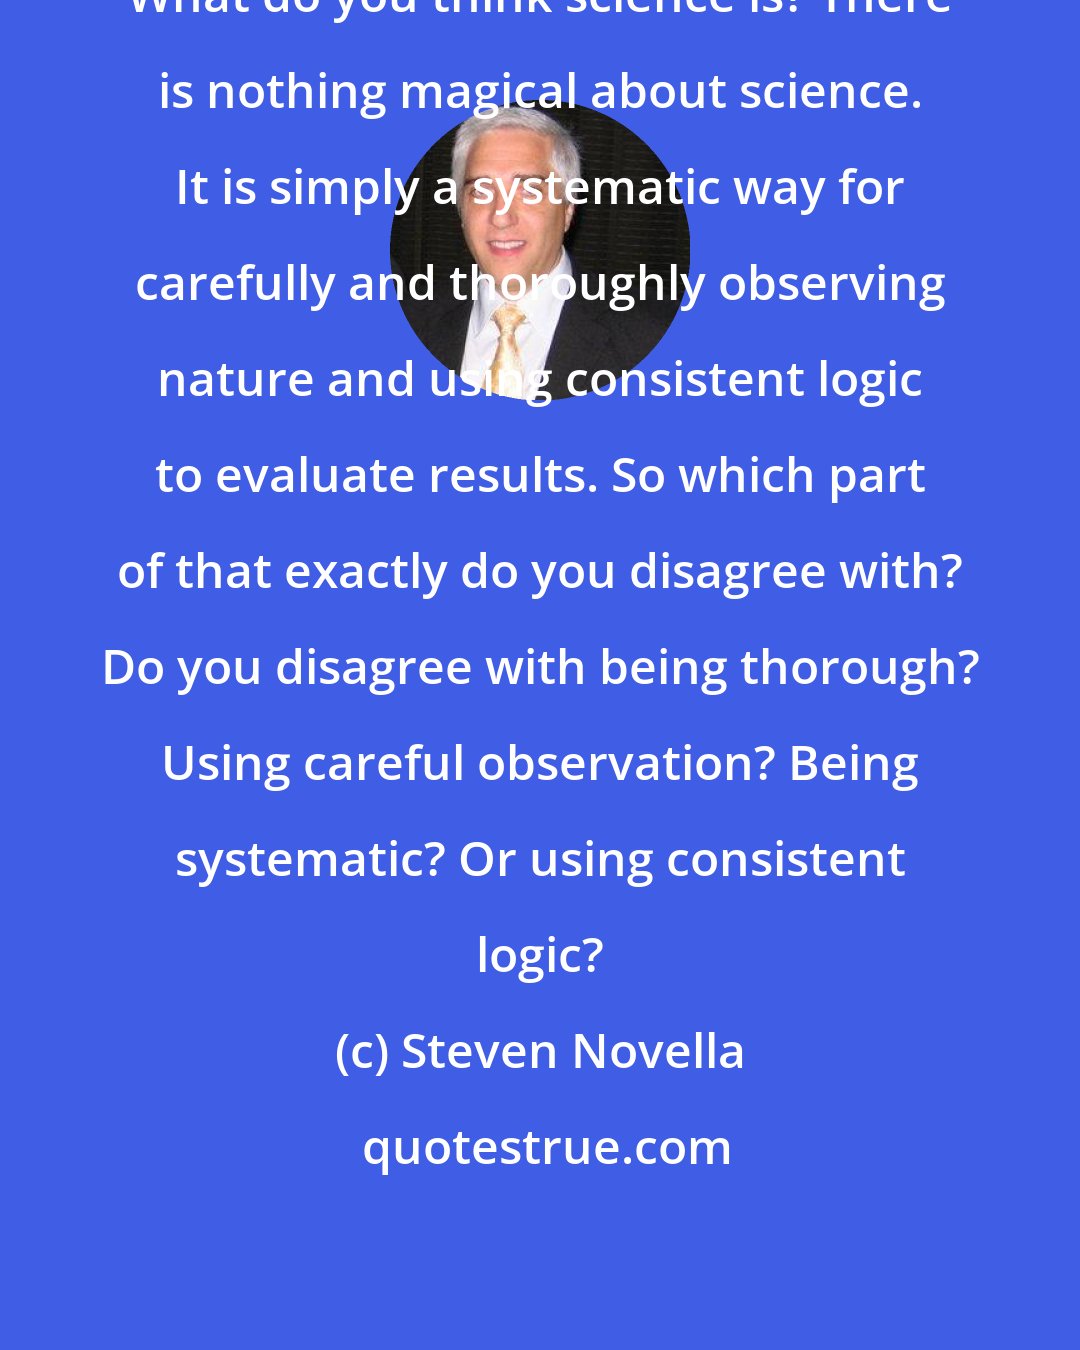 Steven Novella: What do you think science is? There is nothing magical about science. It is simply a systematic way for carefully and thoroughly observing nature and using consistent logic to evaluate results. So which part of that exactly do you disagree with? Do you disagree with being thorough? Using careful observation? Being systematic? Or using consistent logic?